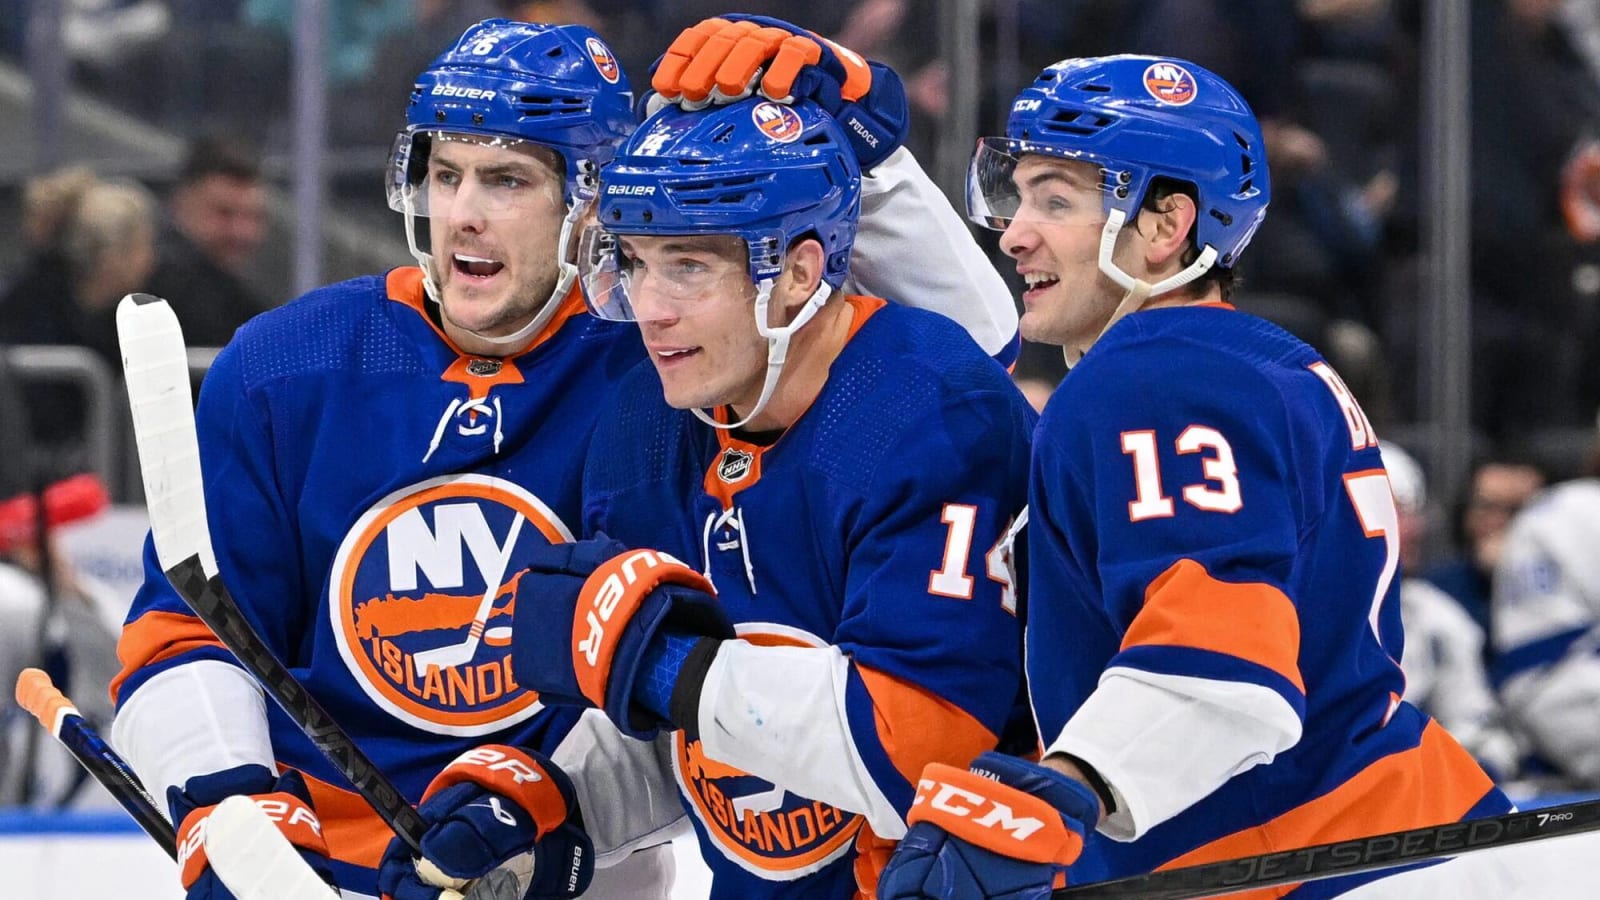 'If we can add, we will. Are we going to subtract? Absolutely not': Islanders GM Lou Lamoriello speaks ahead of trade deadline